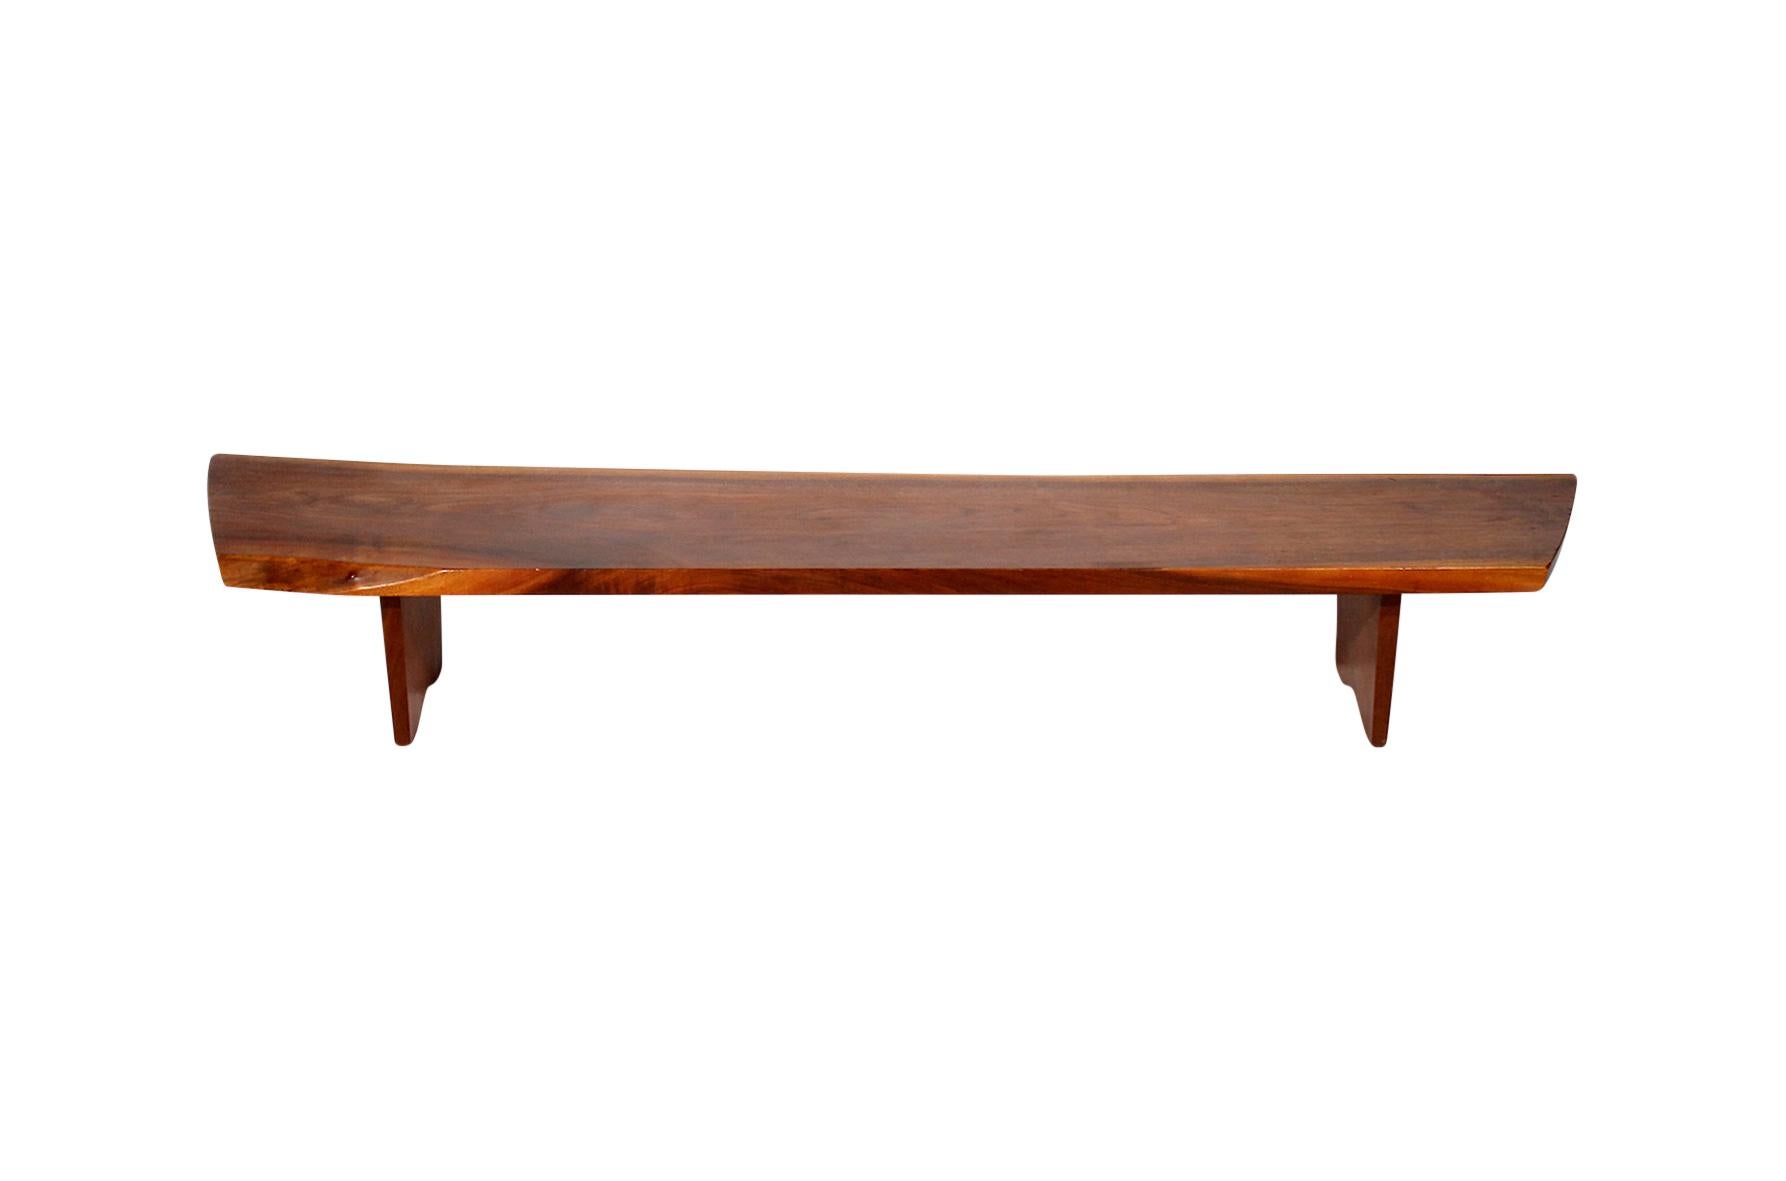 Single slab 8 ft. bench or table with free edges by George Nakashima, circa 1972.

Bench comes with Provenance.